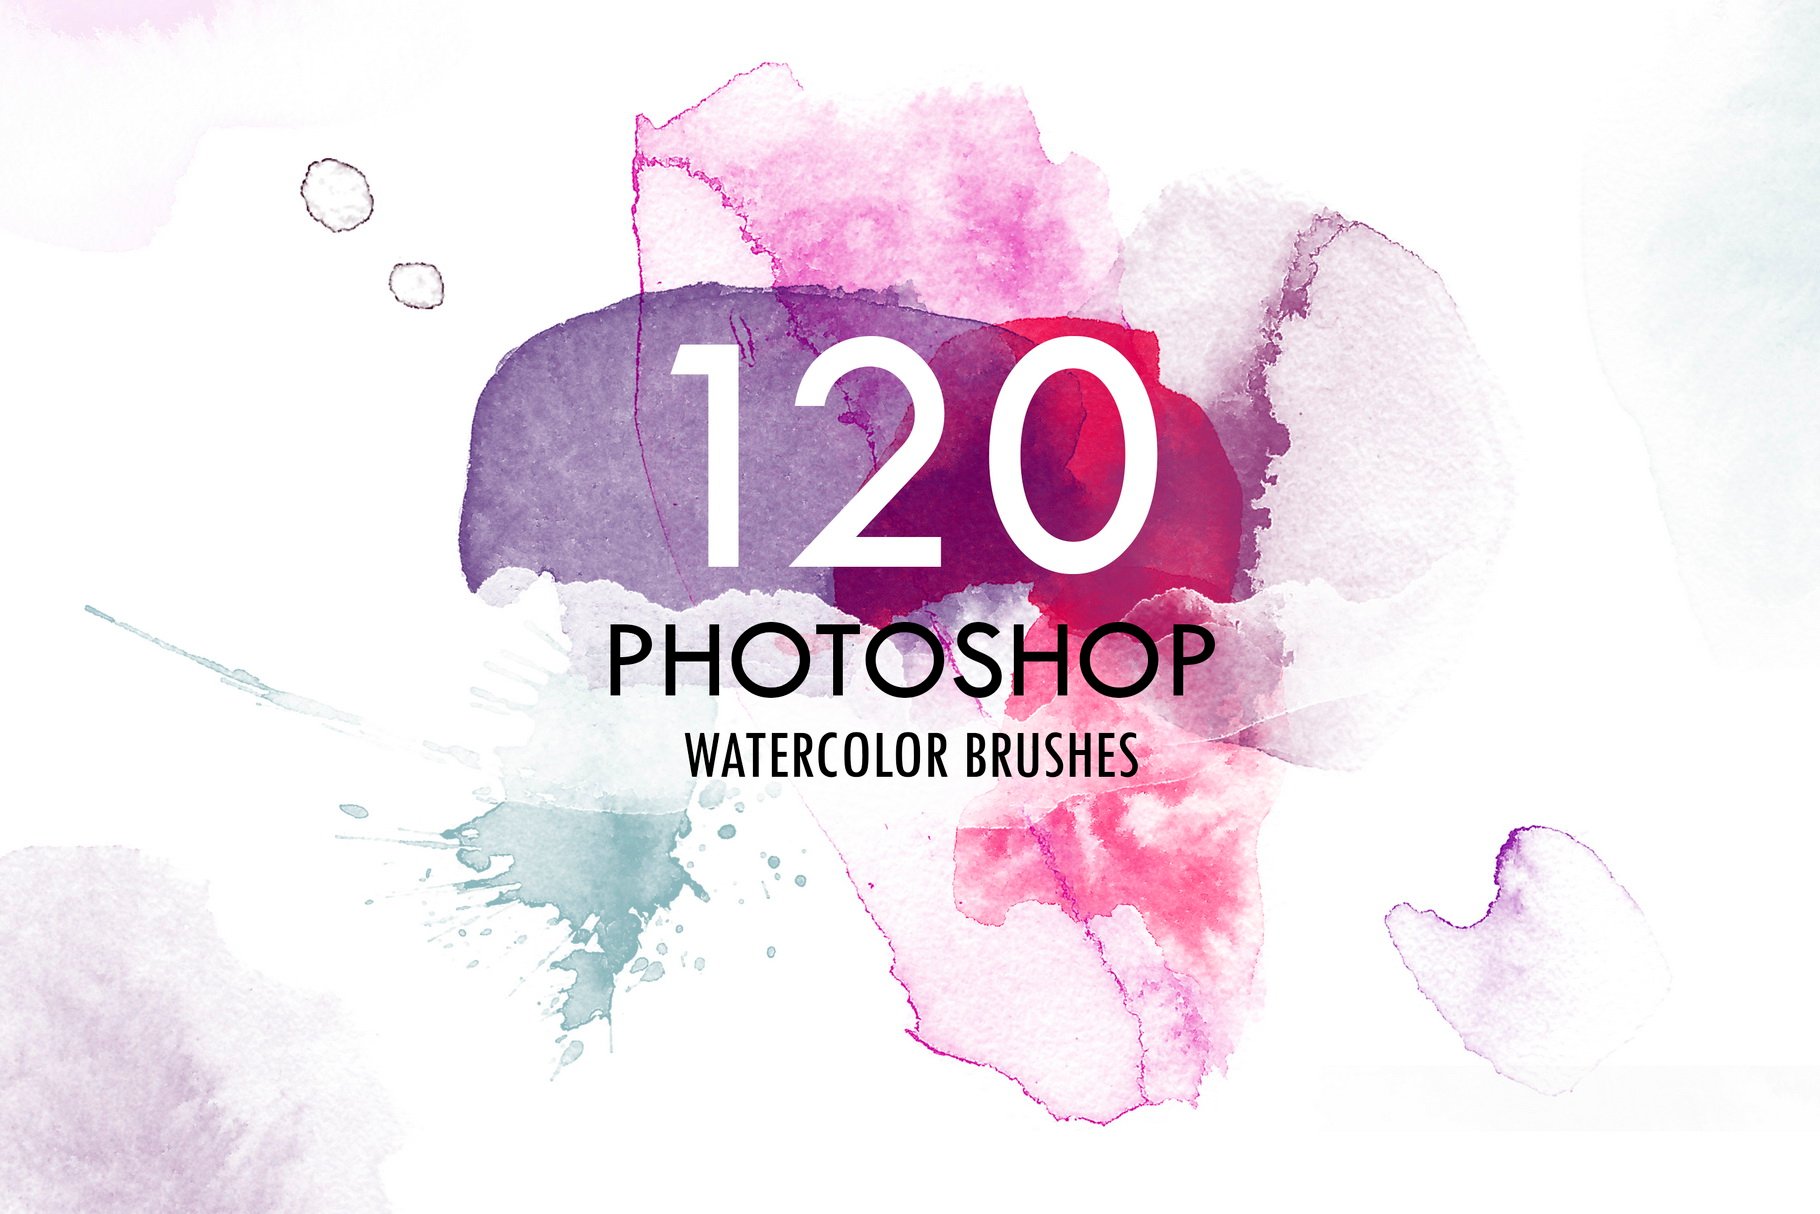 120 Watercolor Photoshop Brushes